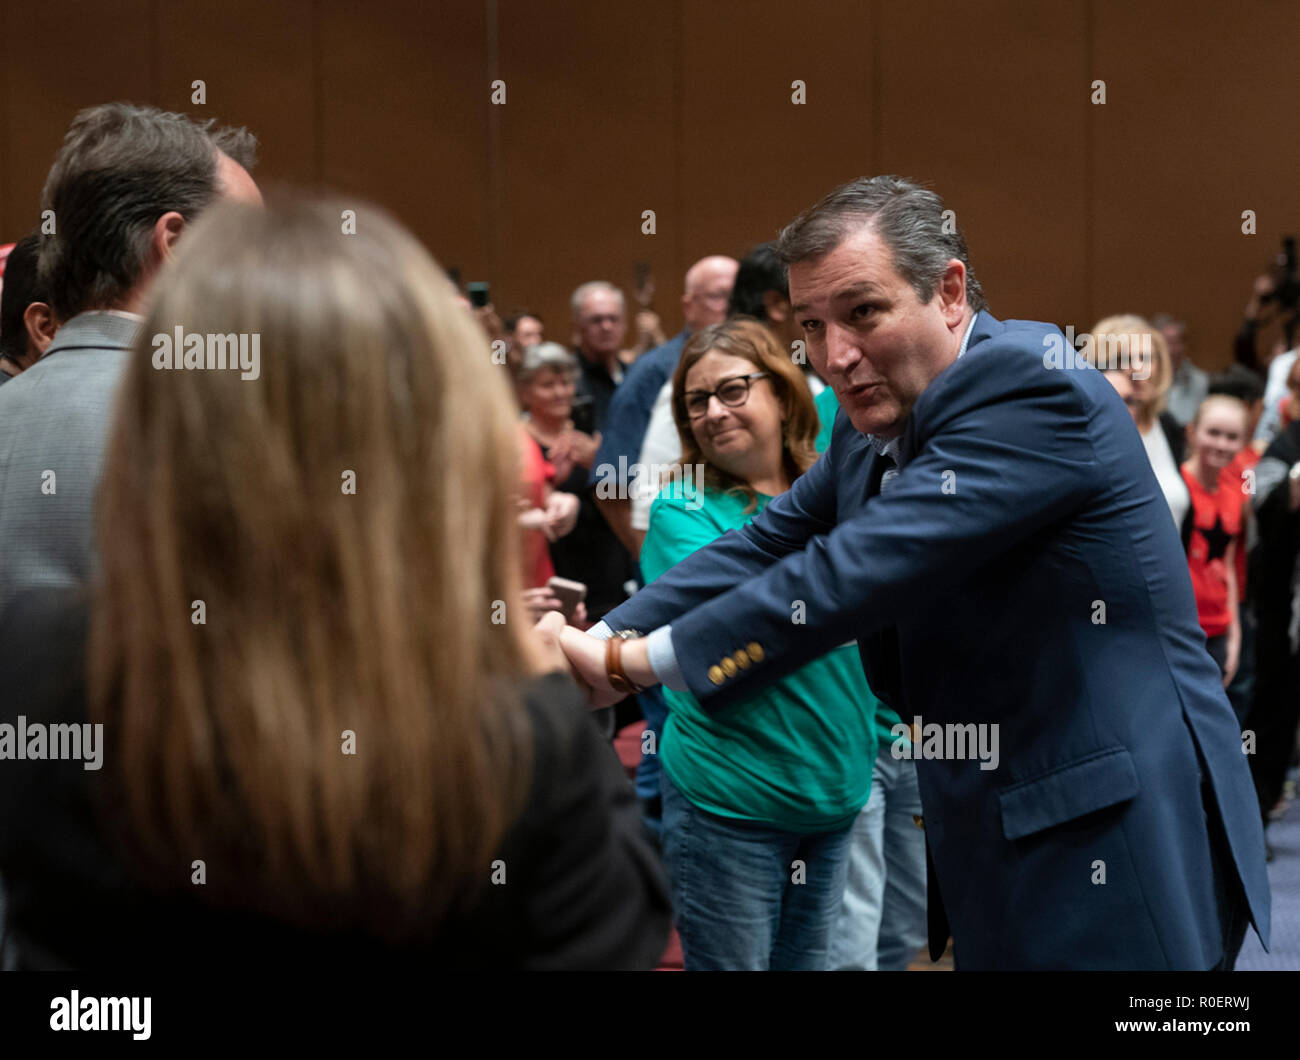 Republican U.S. Sen. Ted Cruz campaigns before a boisterous crowd of about 500 on the last weekend before the midterm elections where he's locked in a close battle with Democratic challenger Beto O'Rourke. Stock Photo